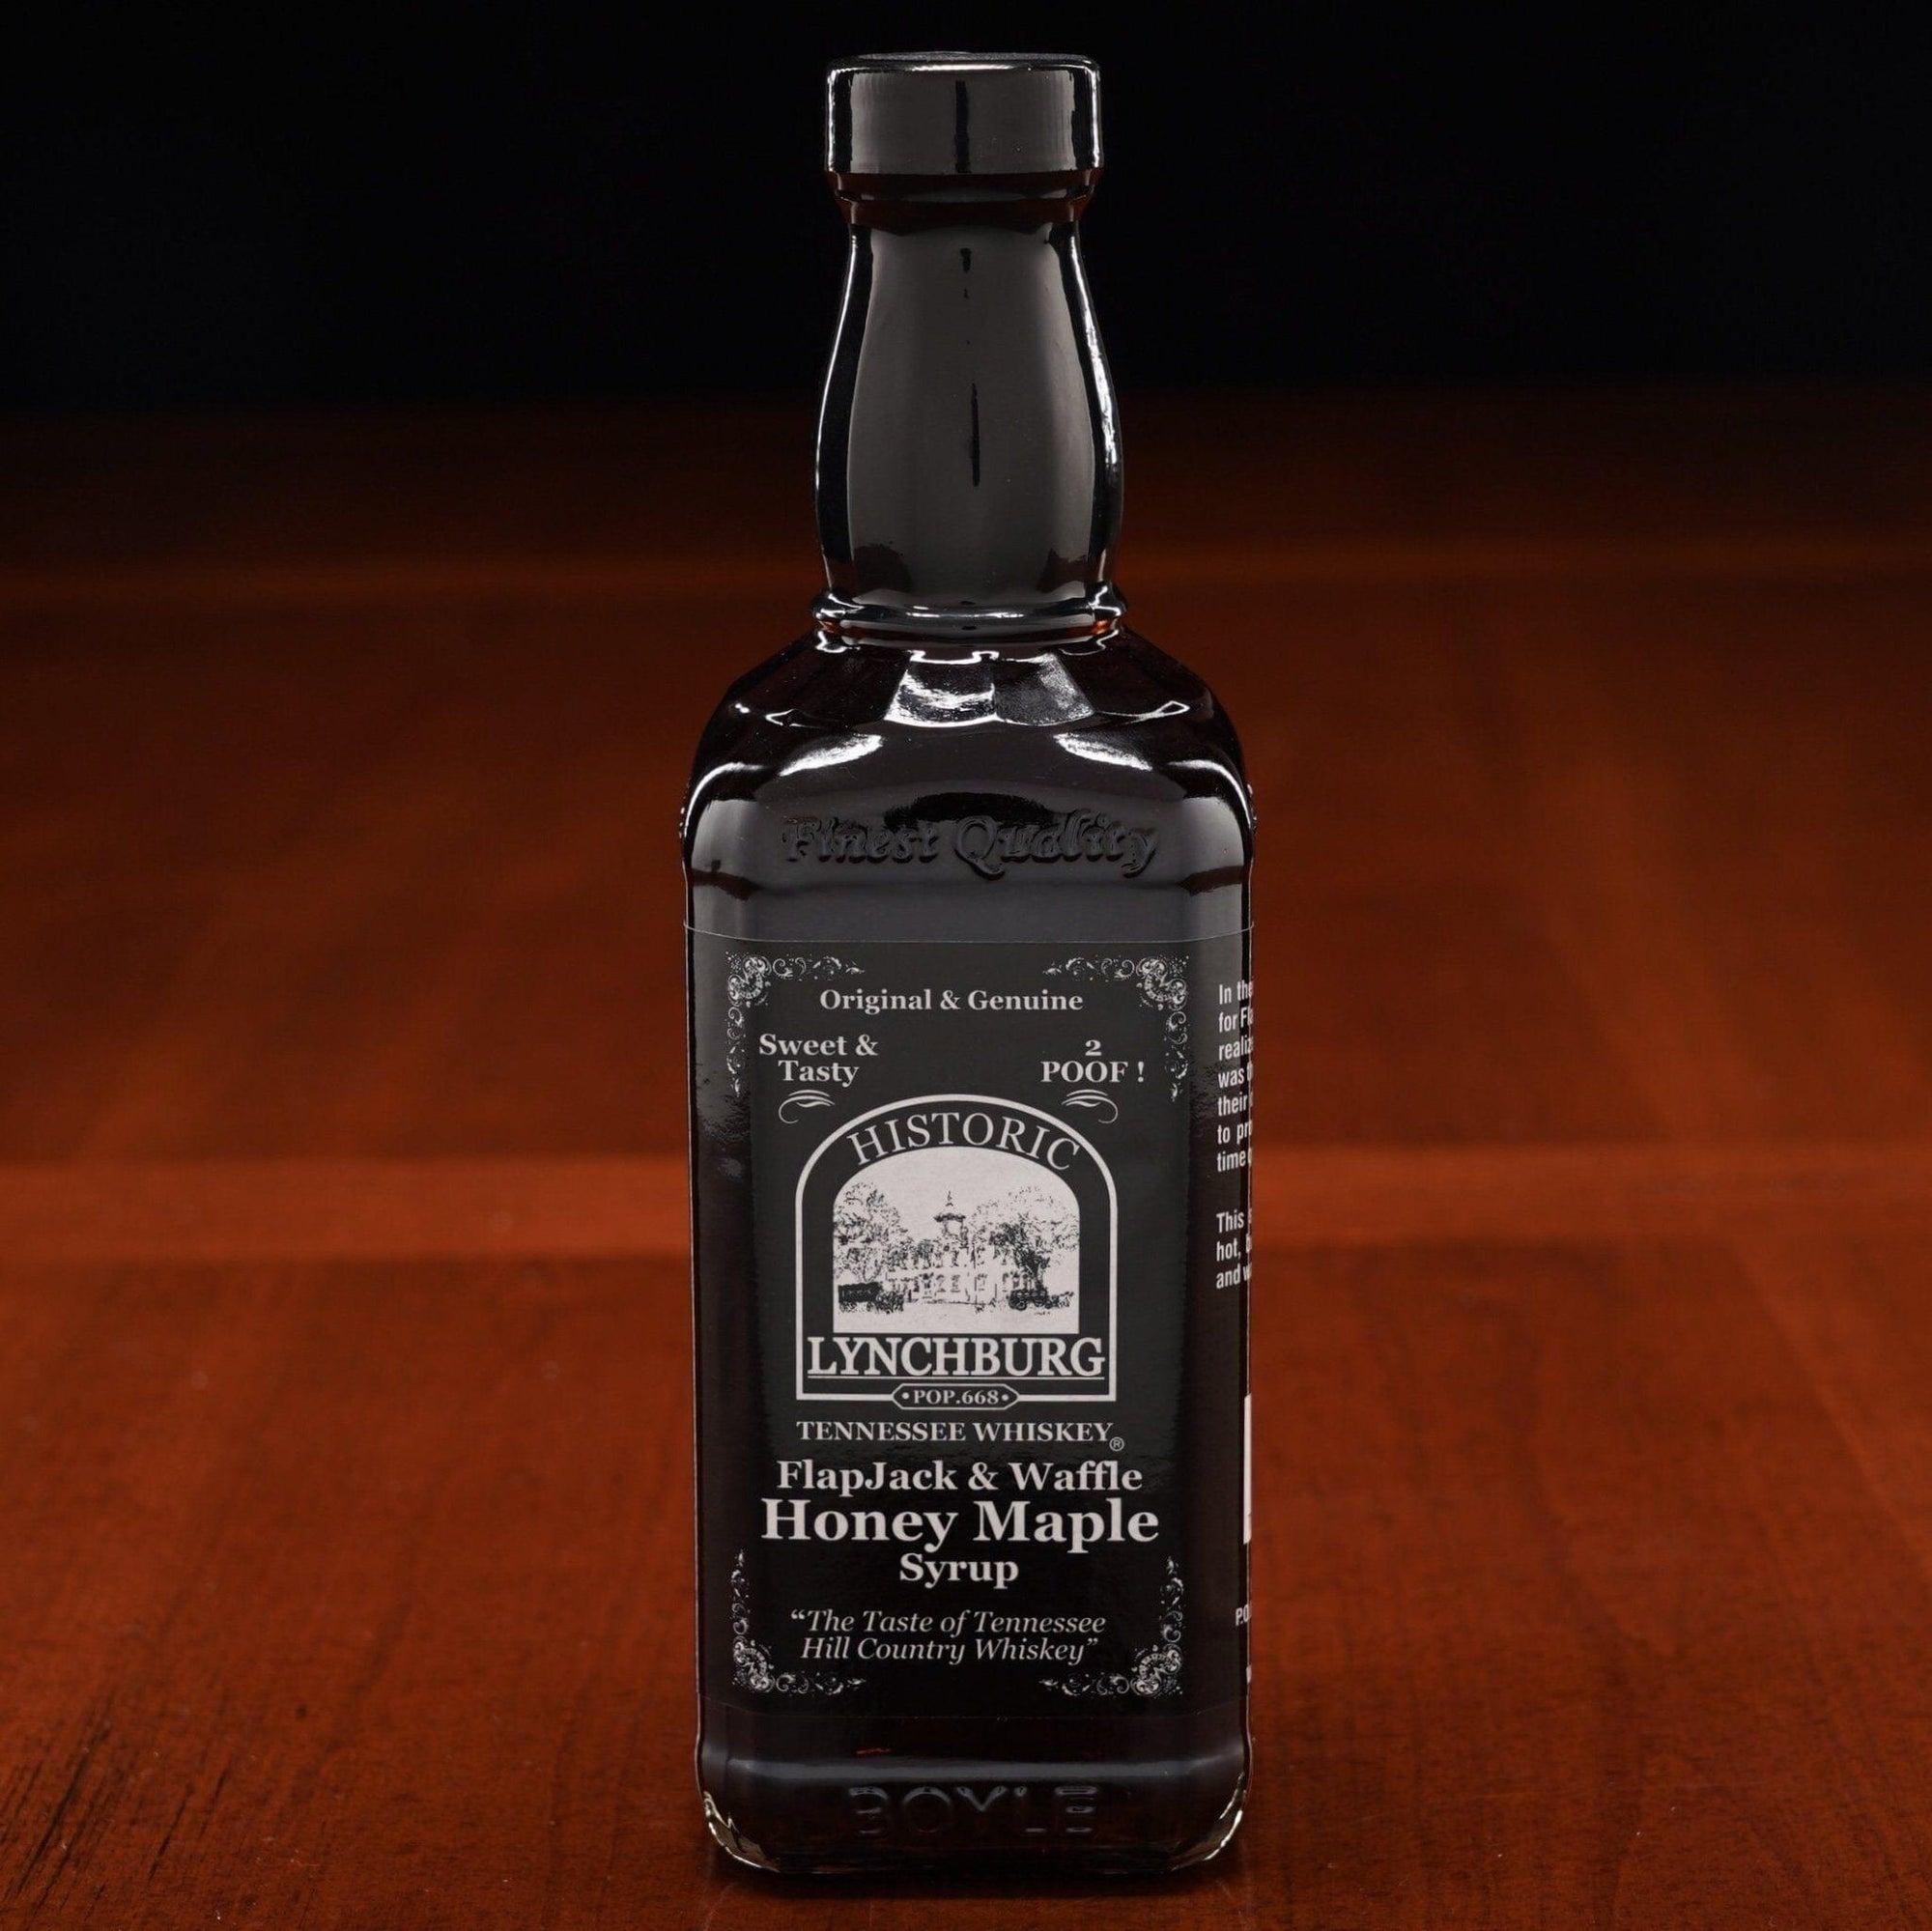 Historic Lynchburg Honey Maple Syrup made with Jack Daniels - The Whiskey Cave